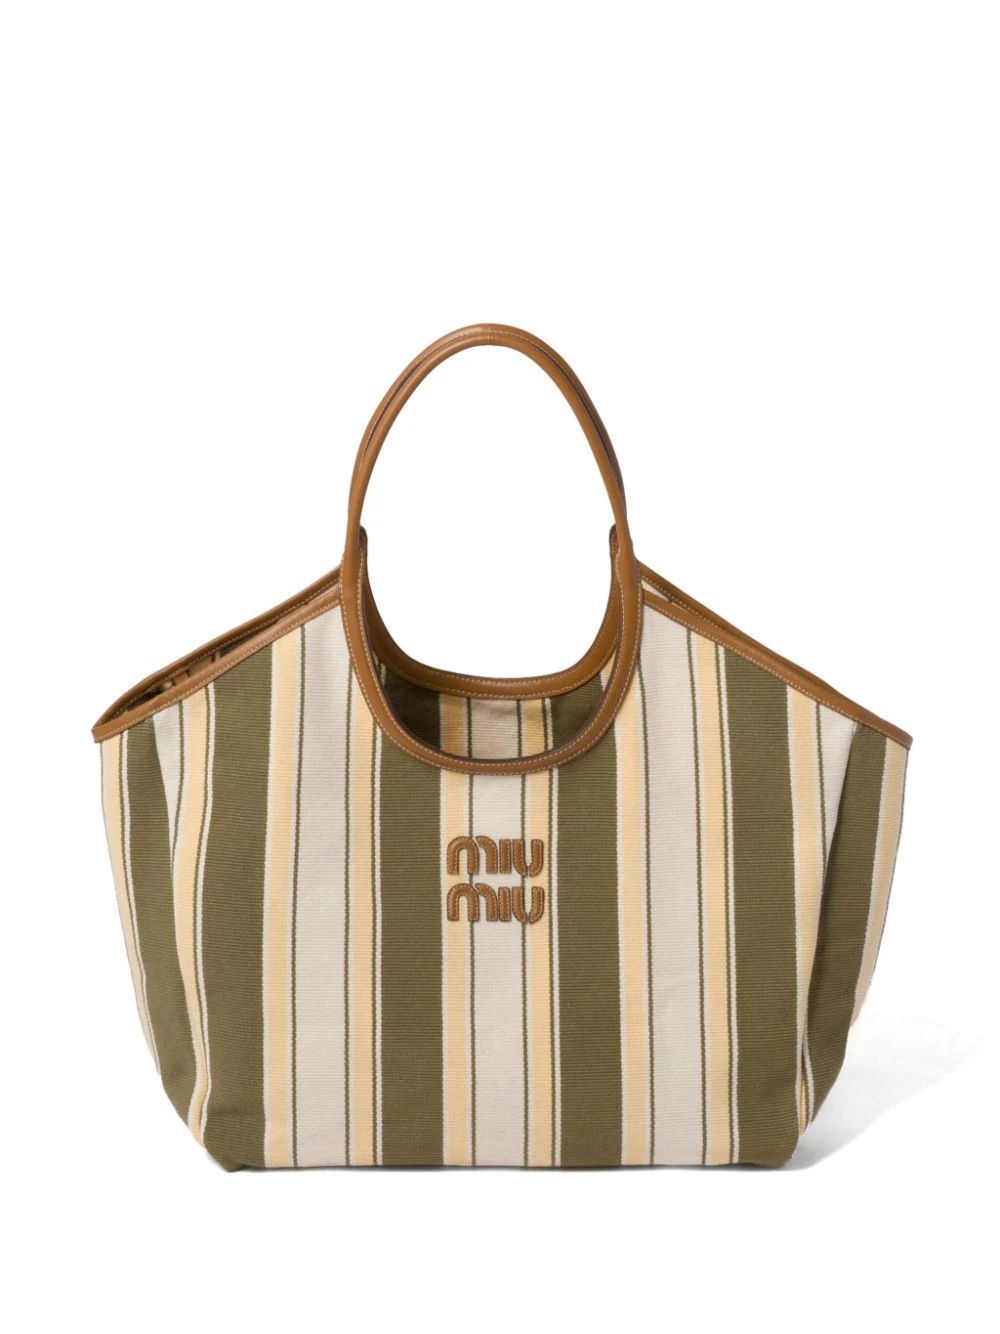 The DetailsNew SeasonMiu MiuIvy striped tote bagHighlightsolive green/beige canvas/leather vertic... | Farfetch Global